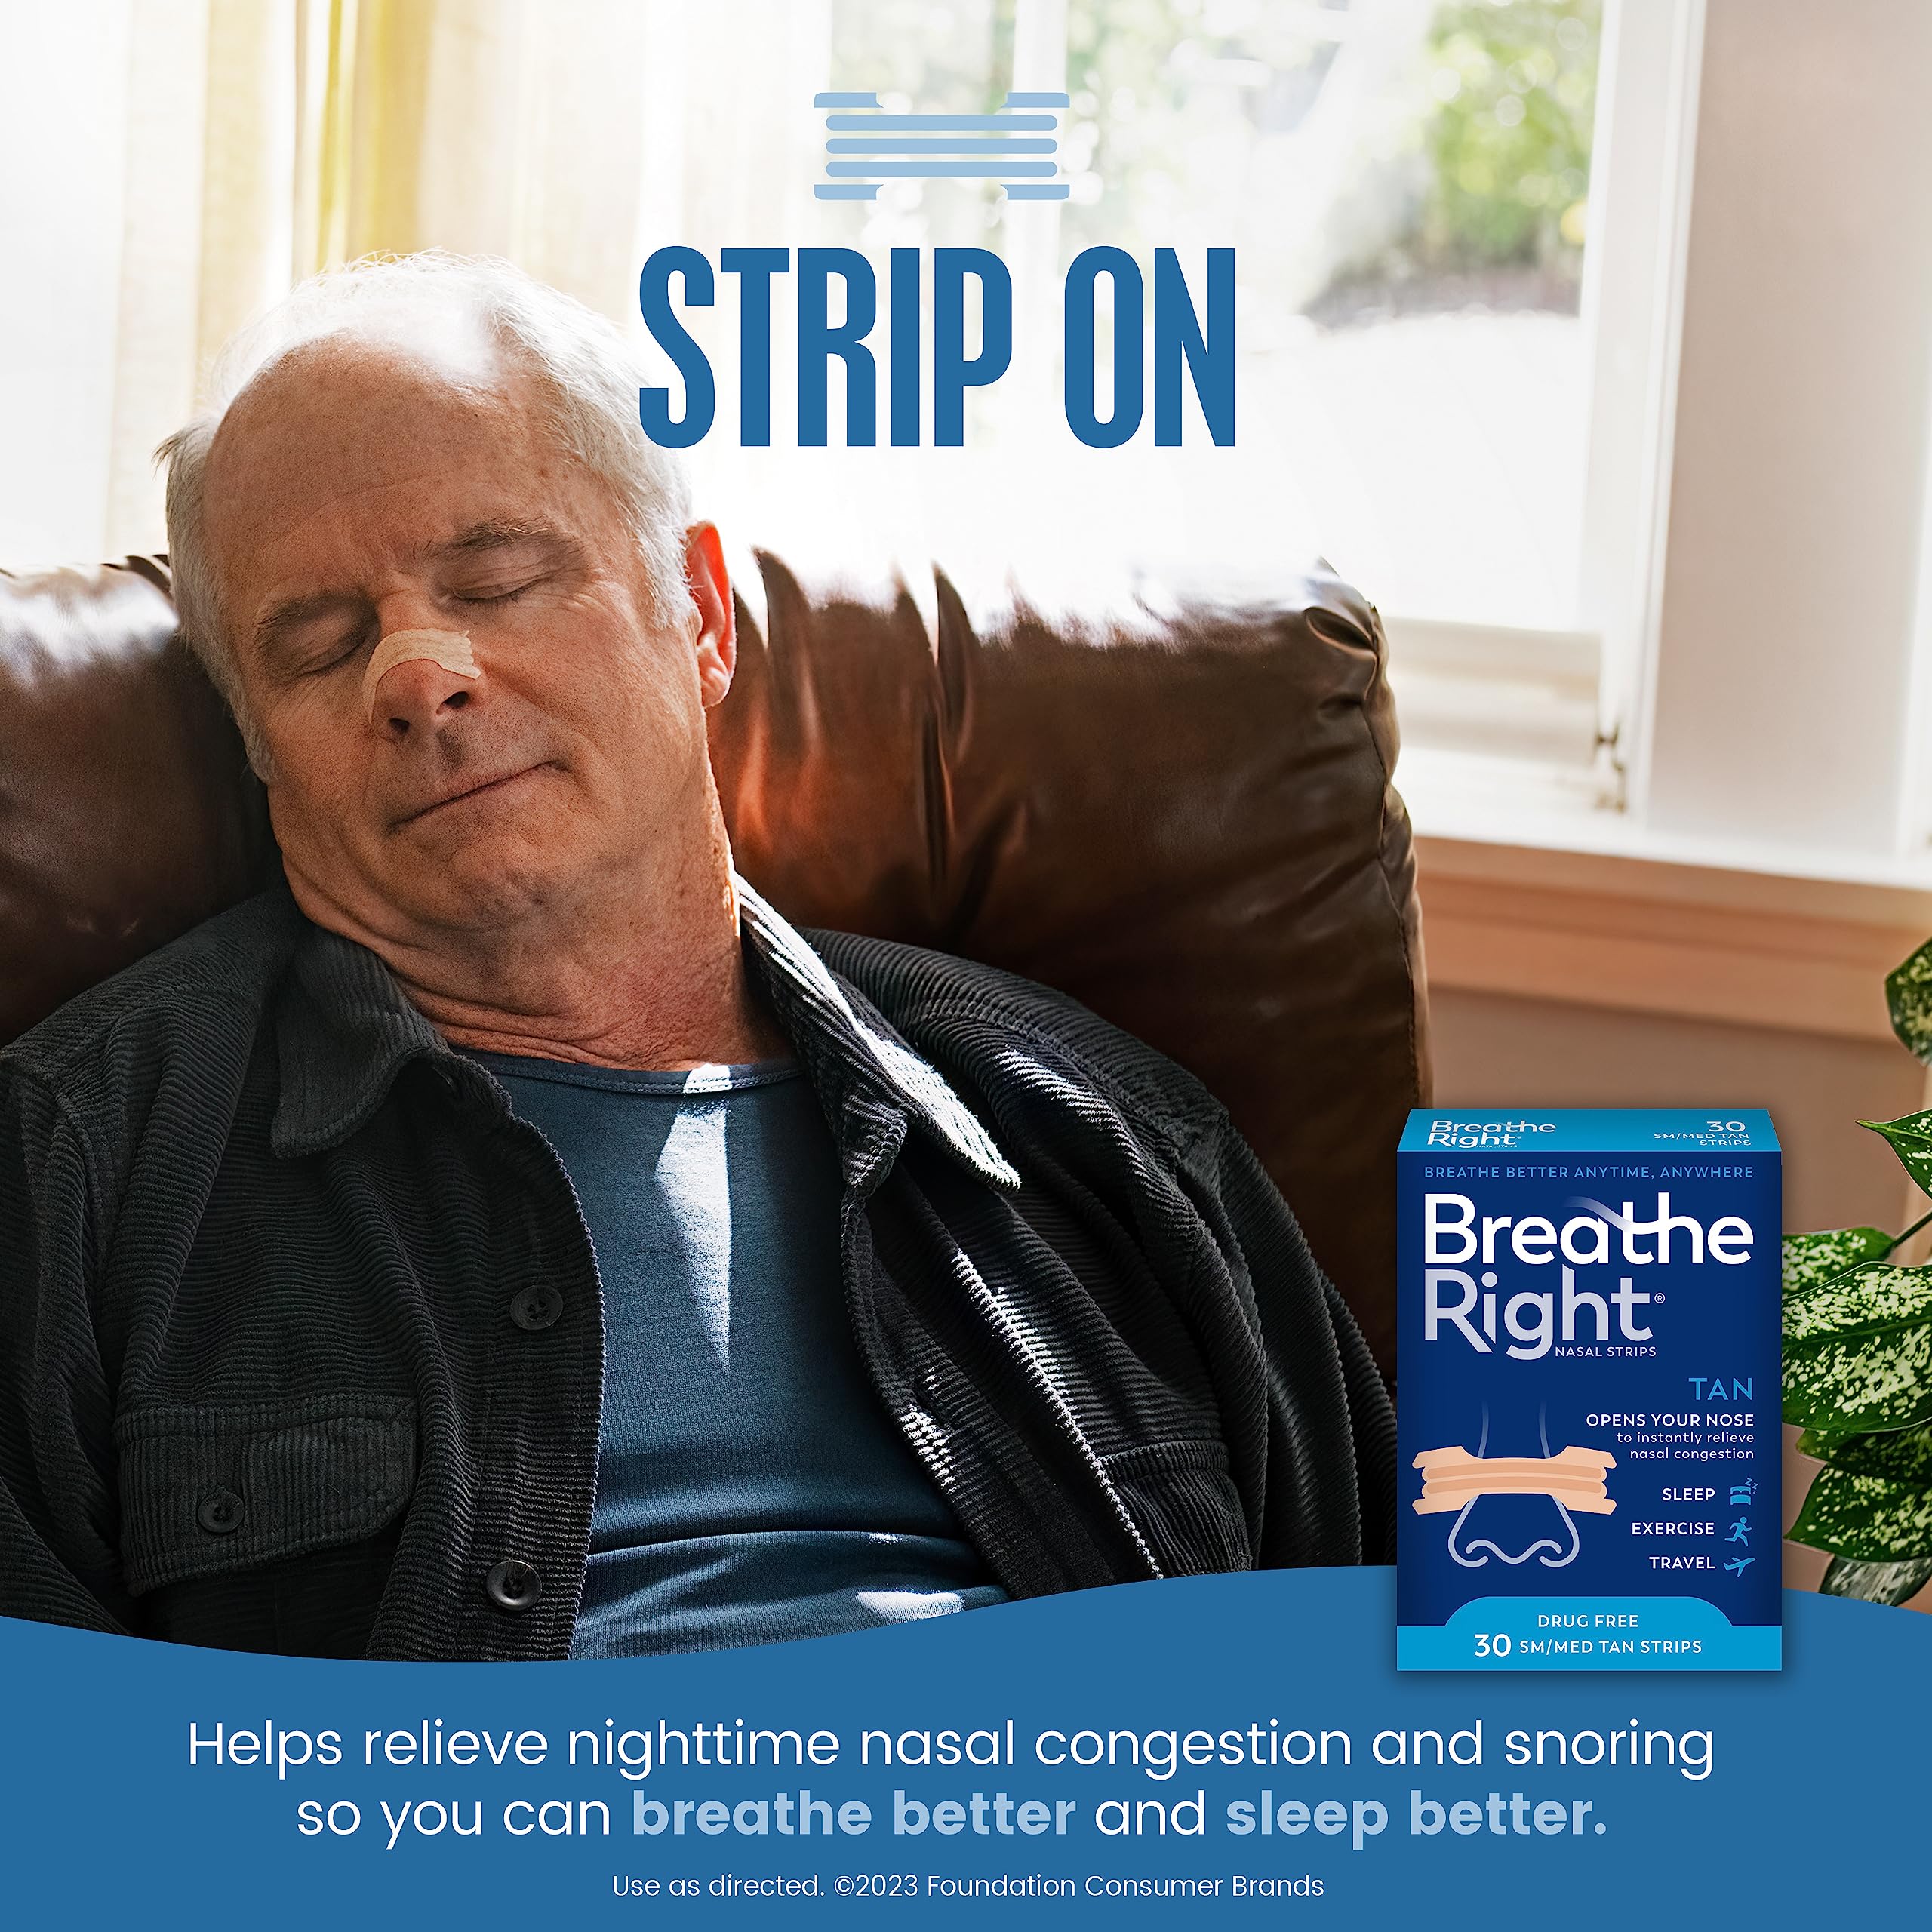 Breathe Right Original Nasal Strips | Tan Nasal Strips | Sm/Med | Help Stop Snoring | Drug-Free Snoring Solution & Instant Nasal Congestion Relief Caused By Colds & Allergies 30ct (packaging may vary)